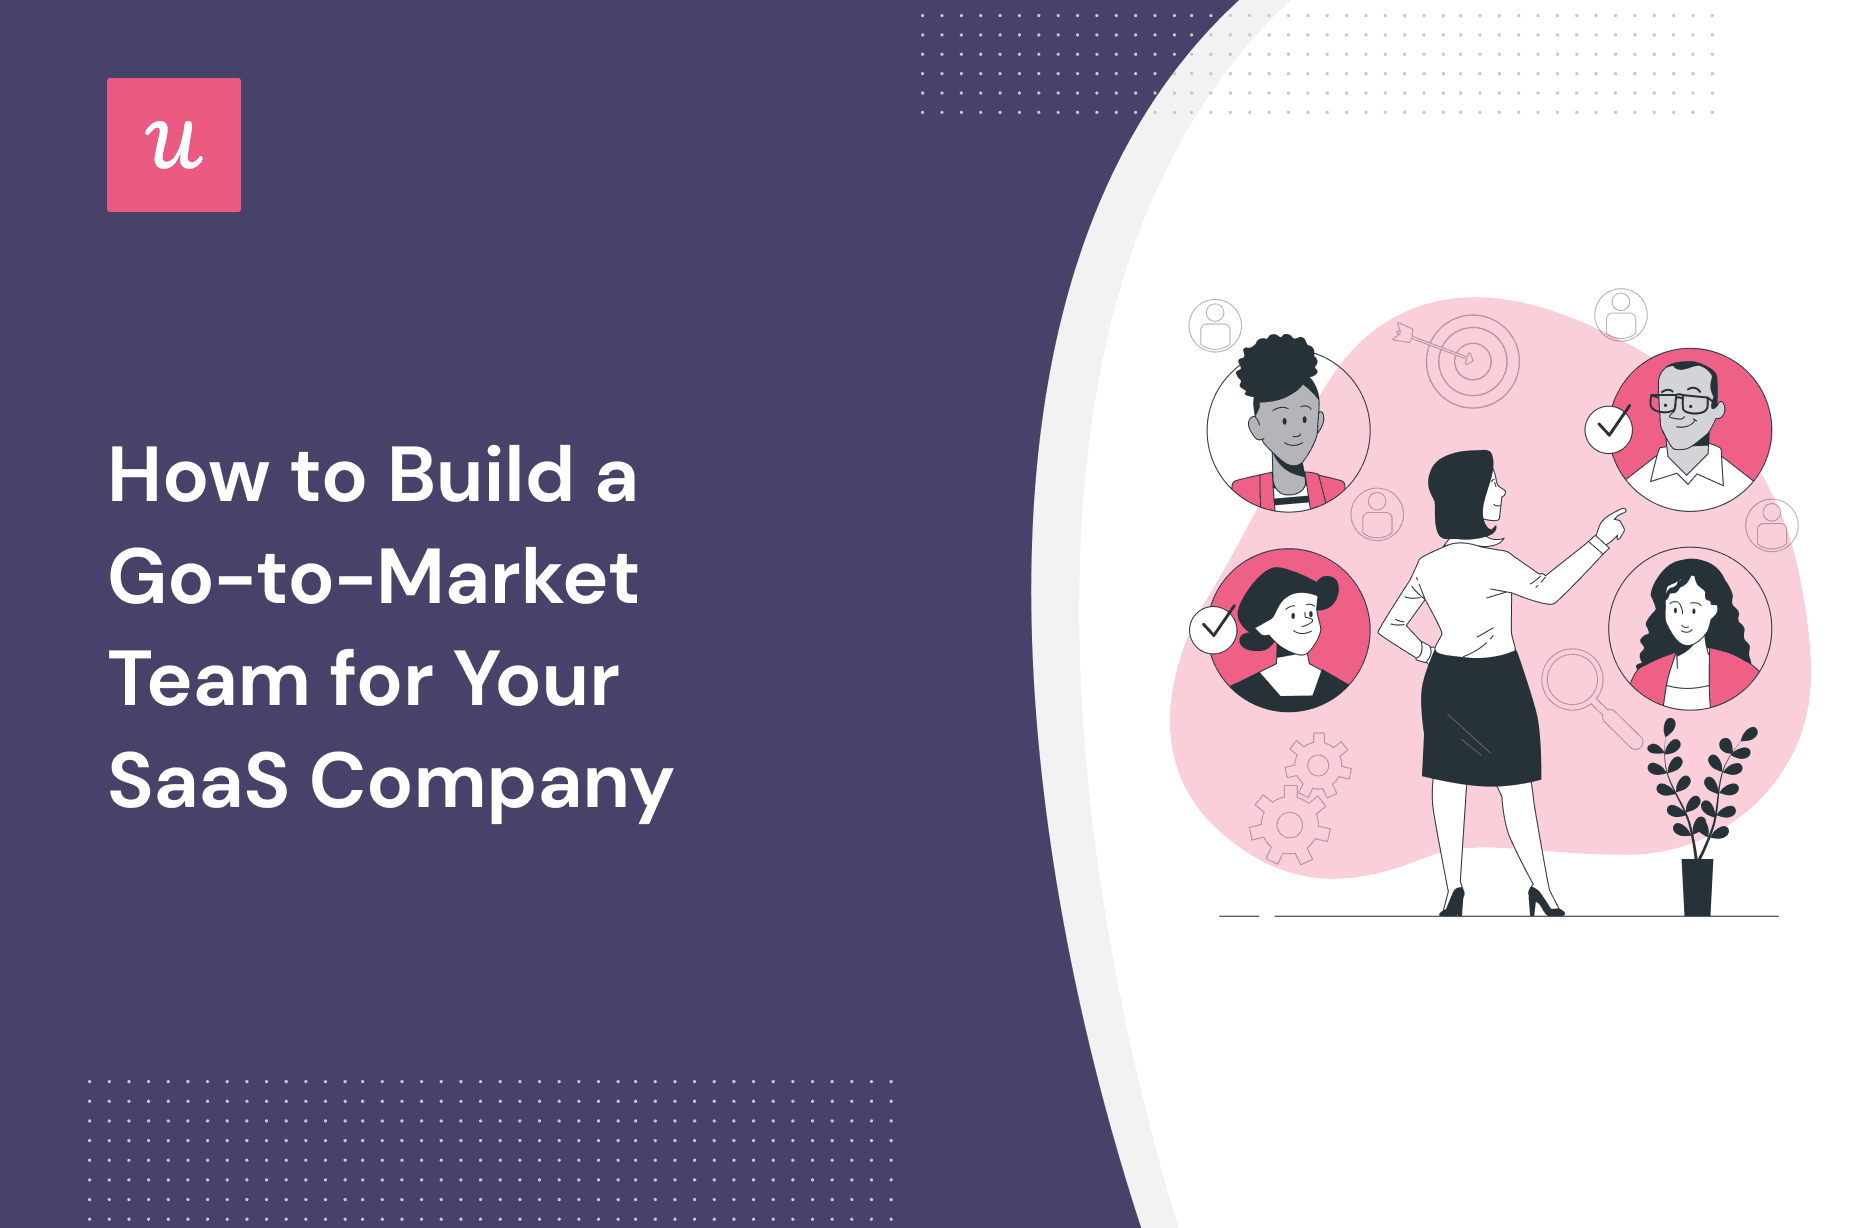 How to Build a Go-to-Market Team for Your SaaS Company cover